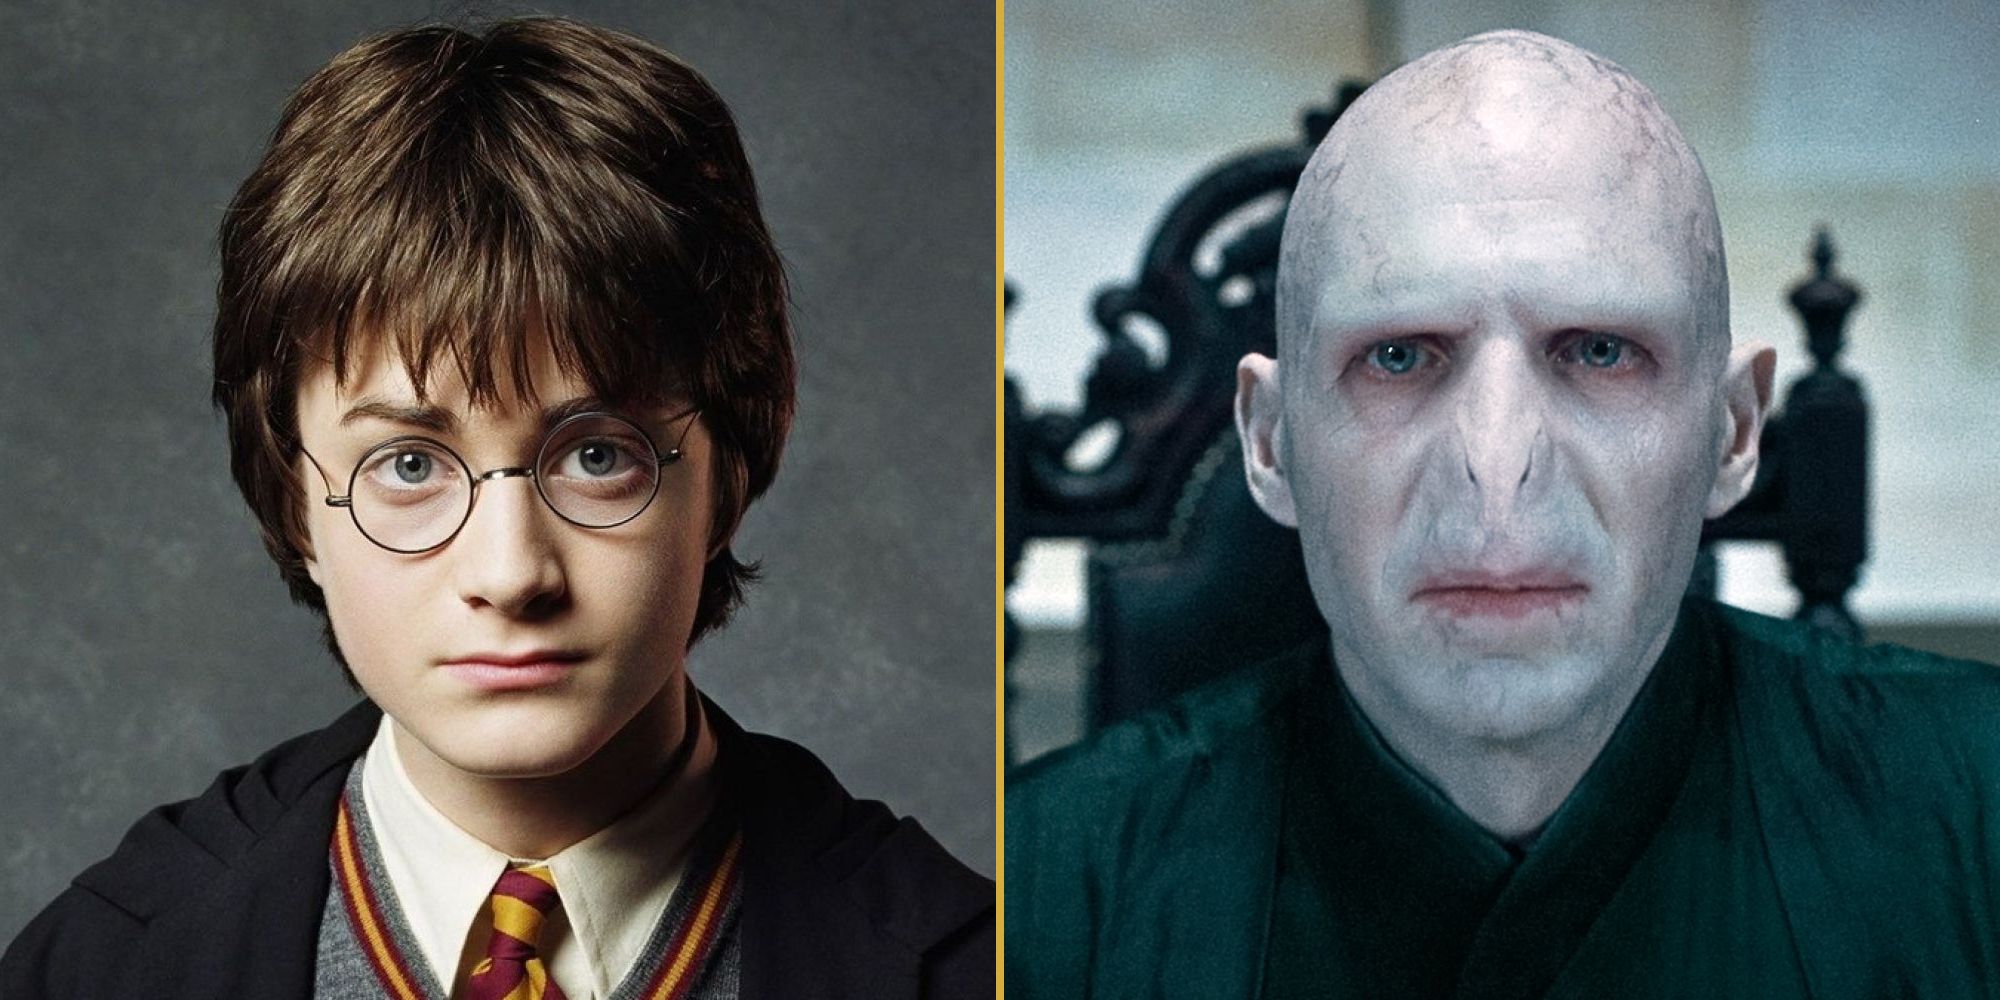 Harry Potter and his distant cousin Lord Voldemort